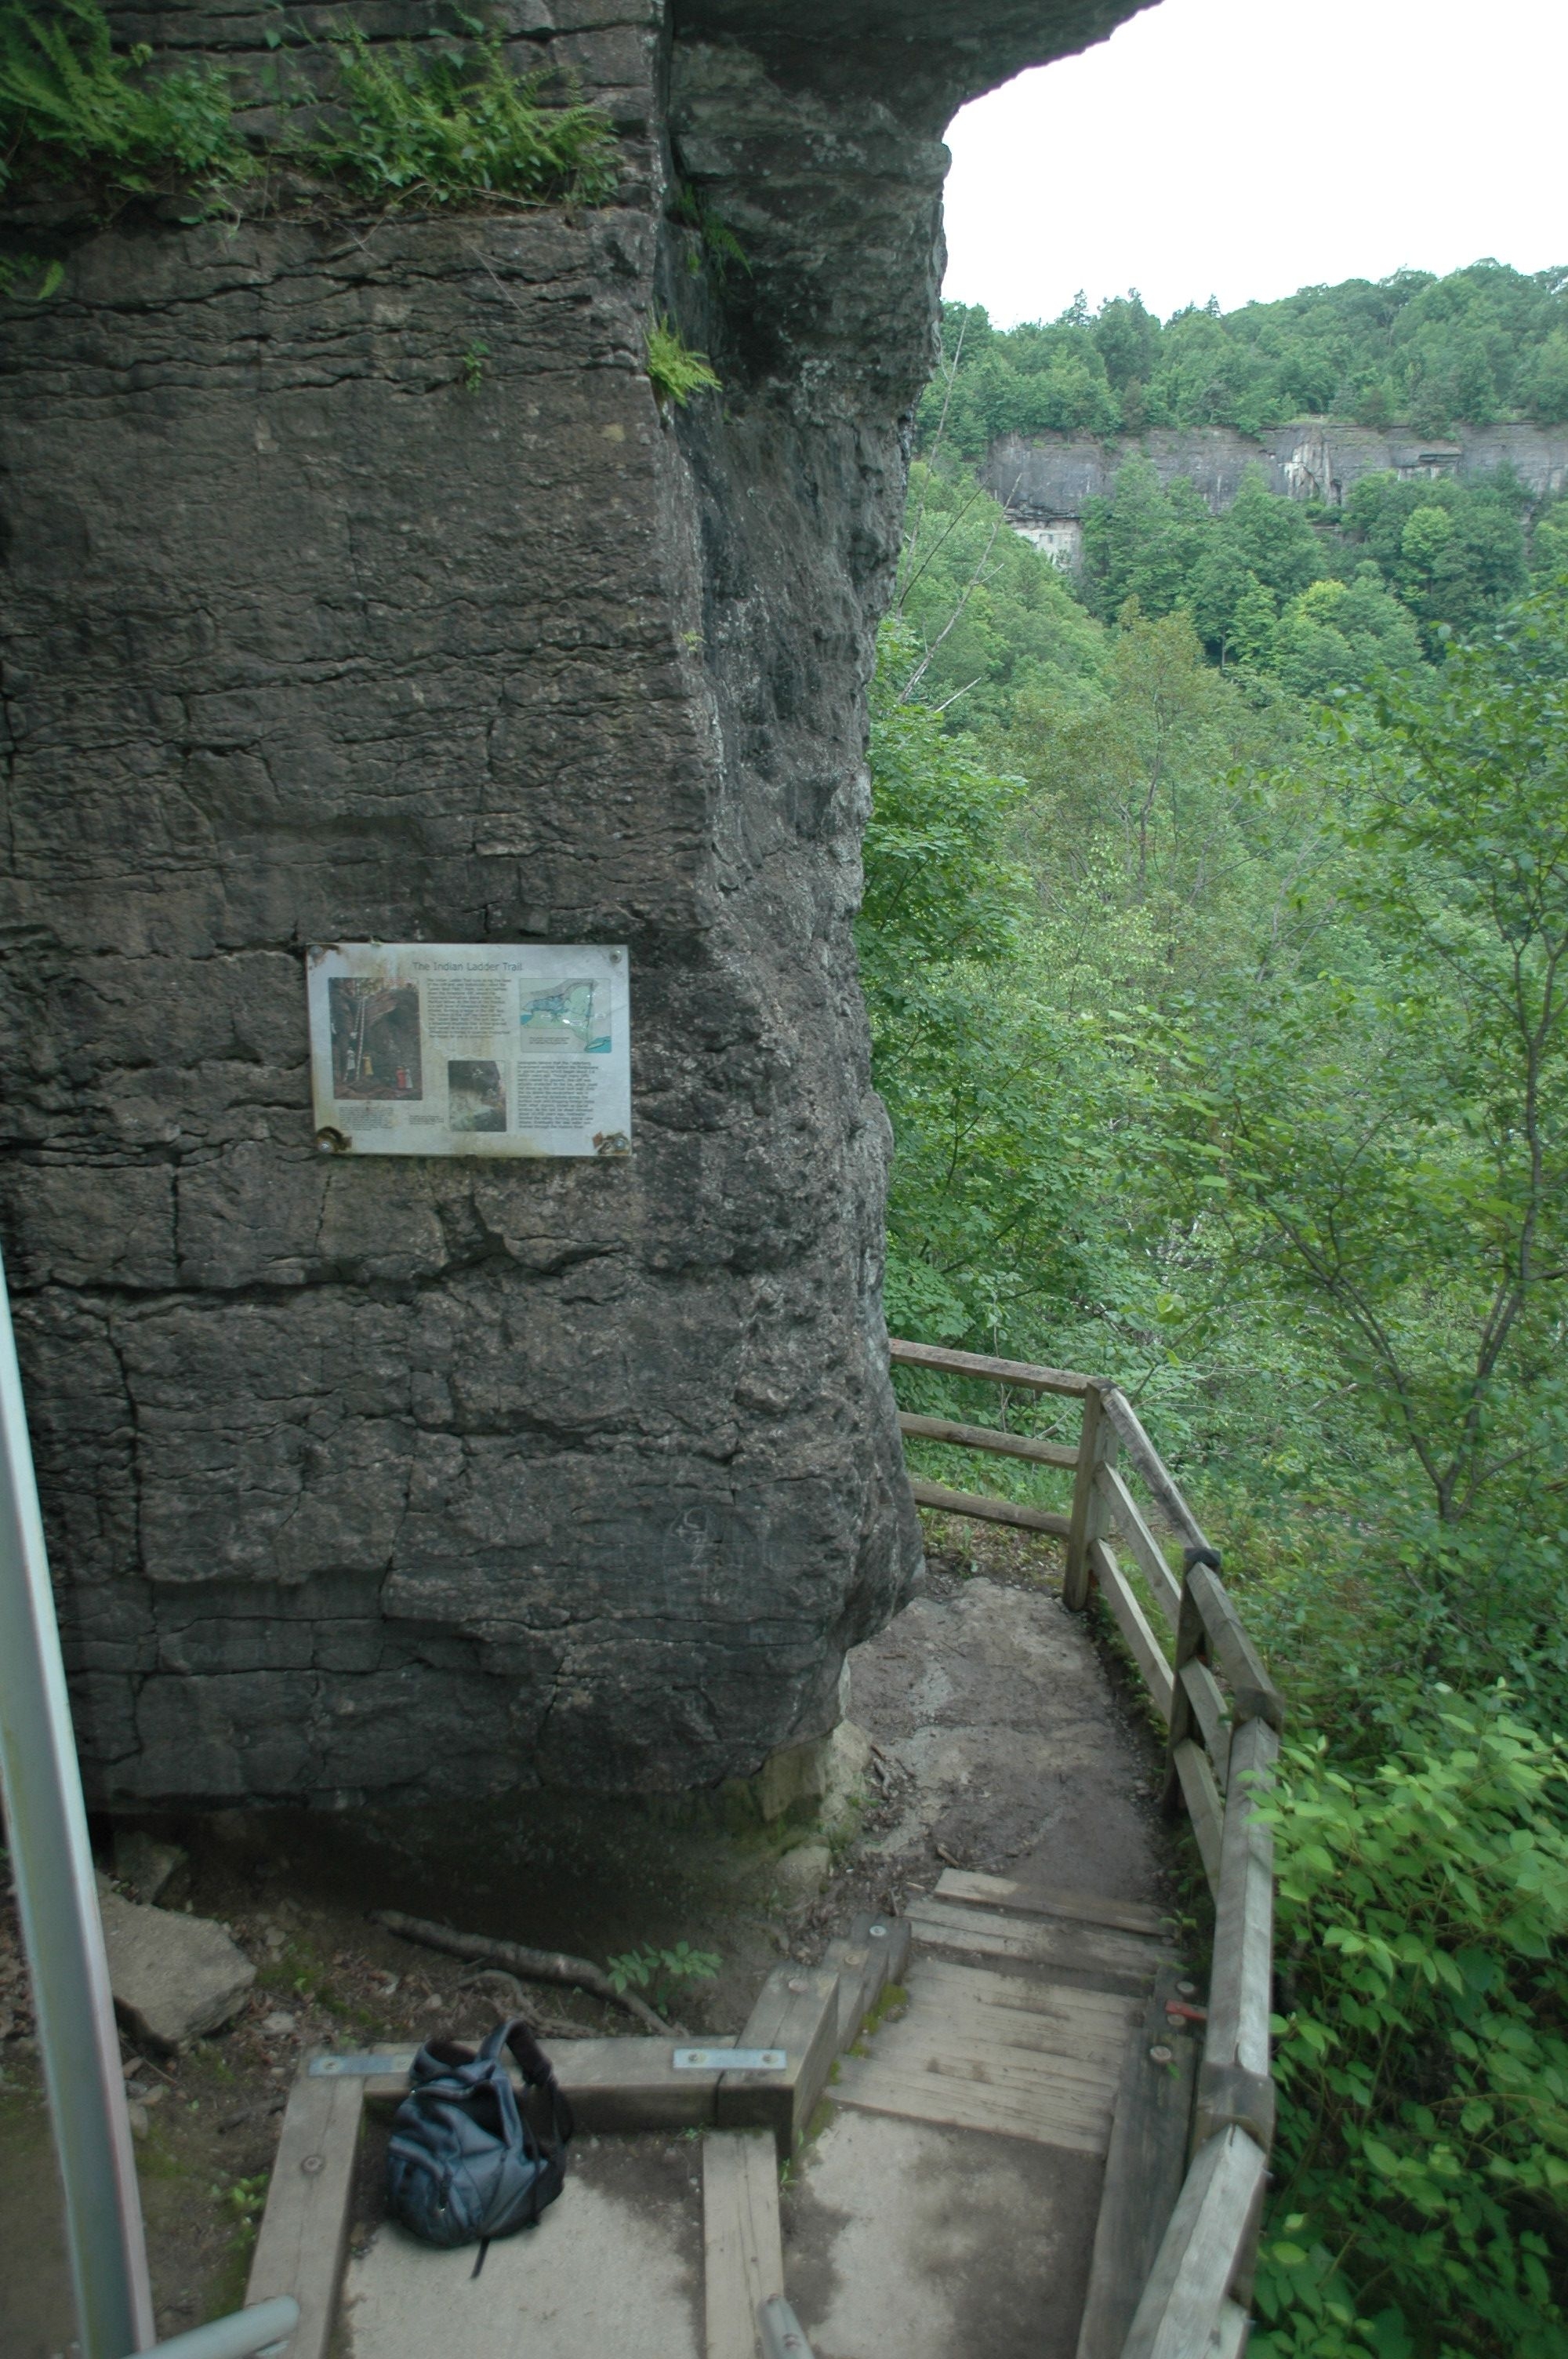 The Indian Ladder Trail Marker